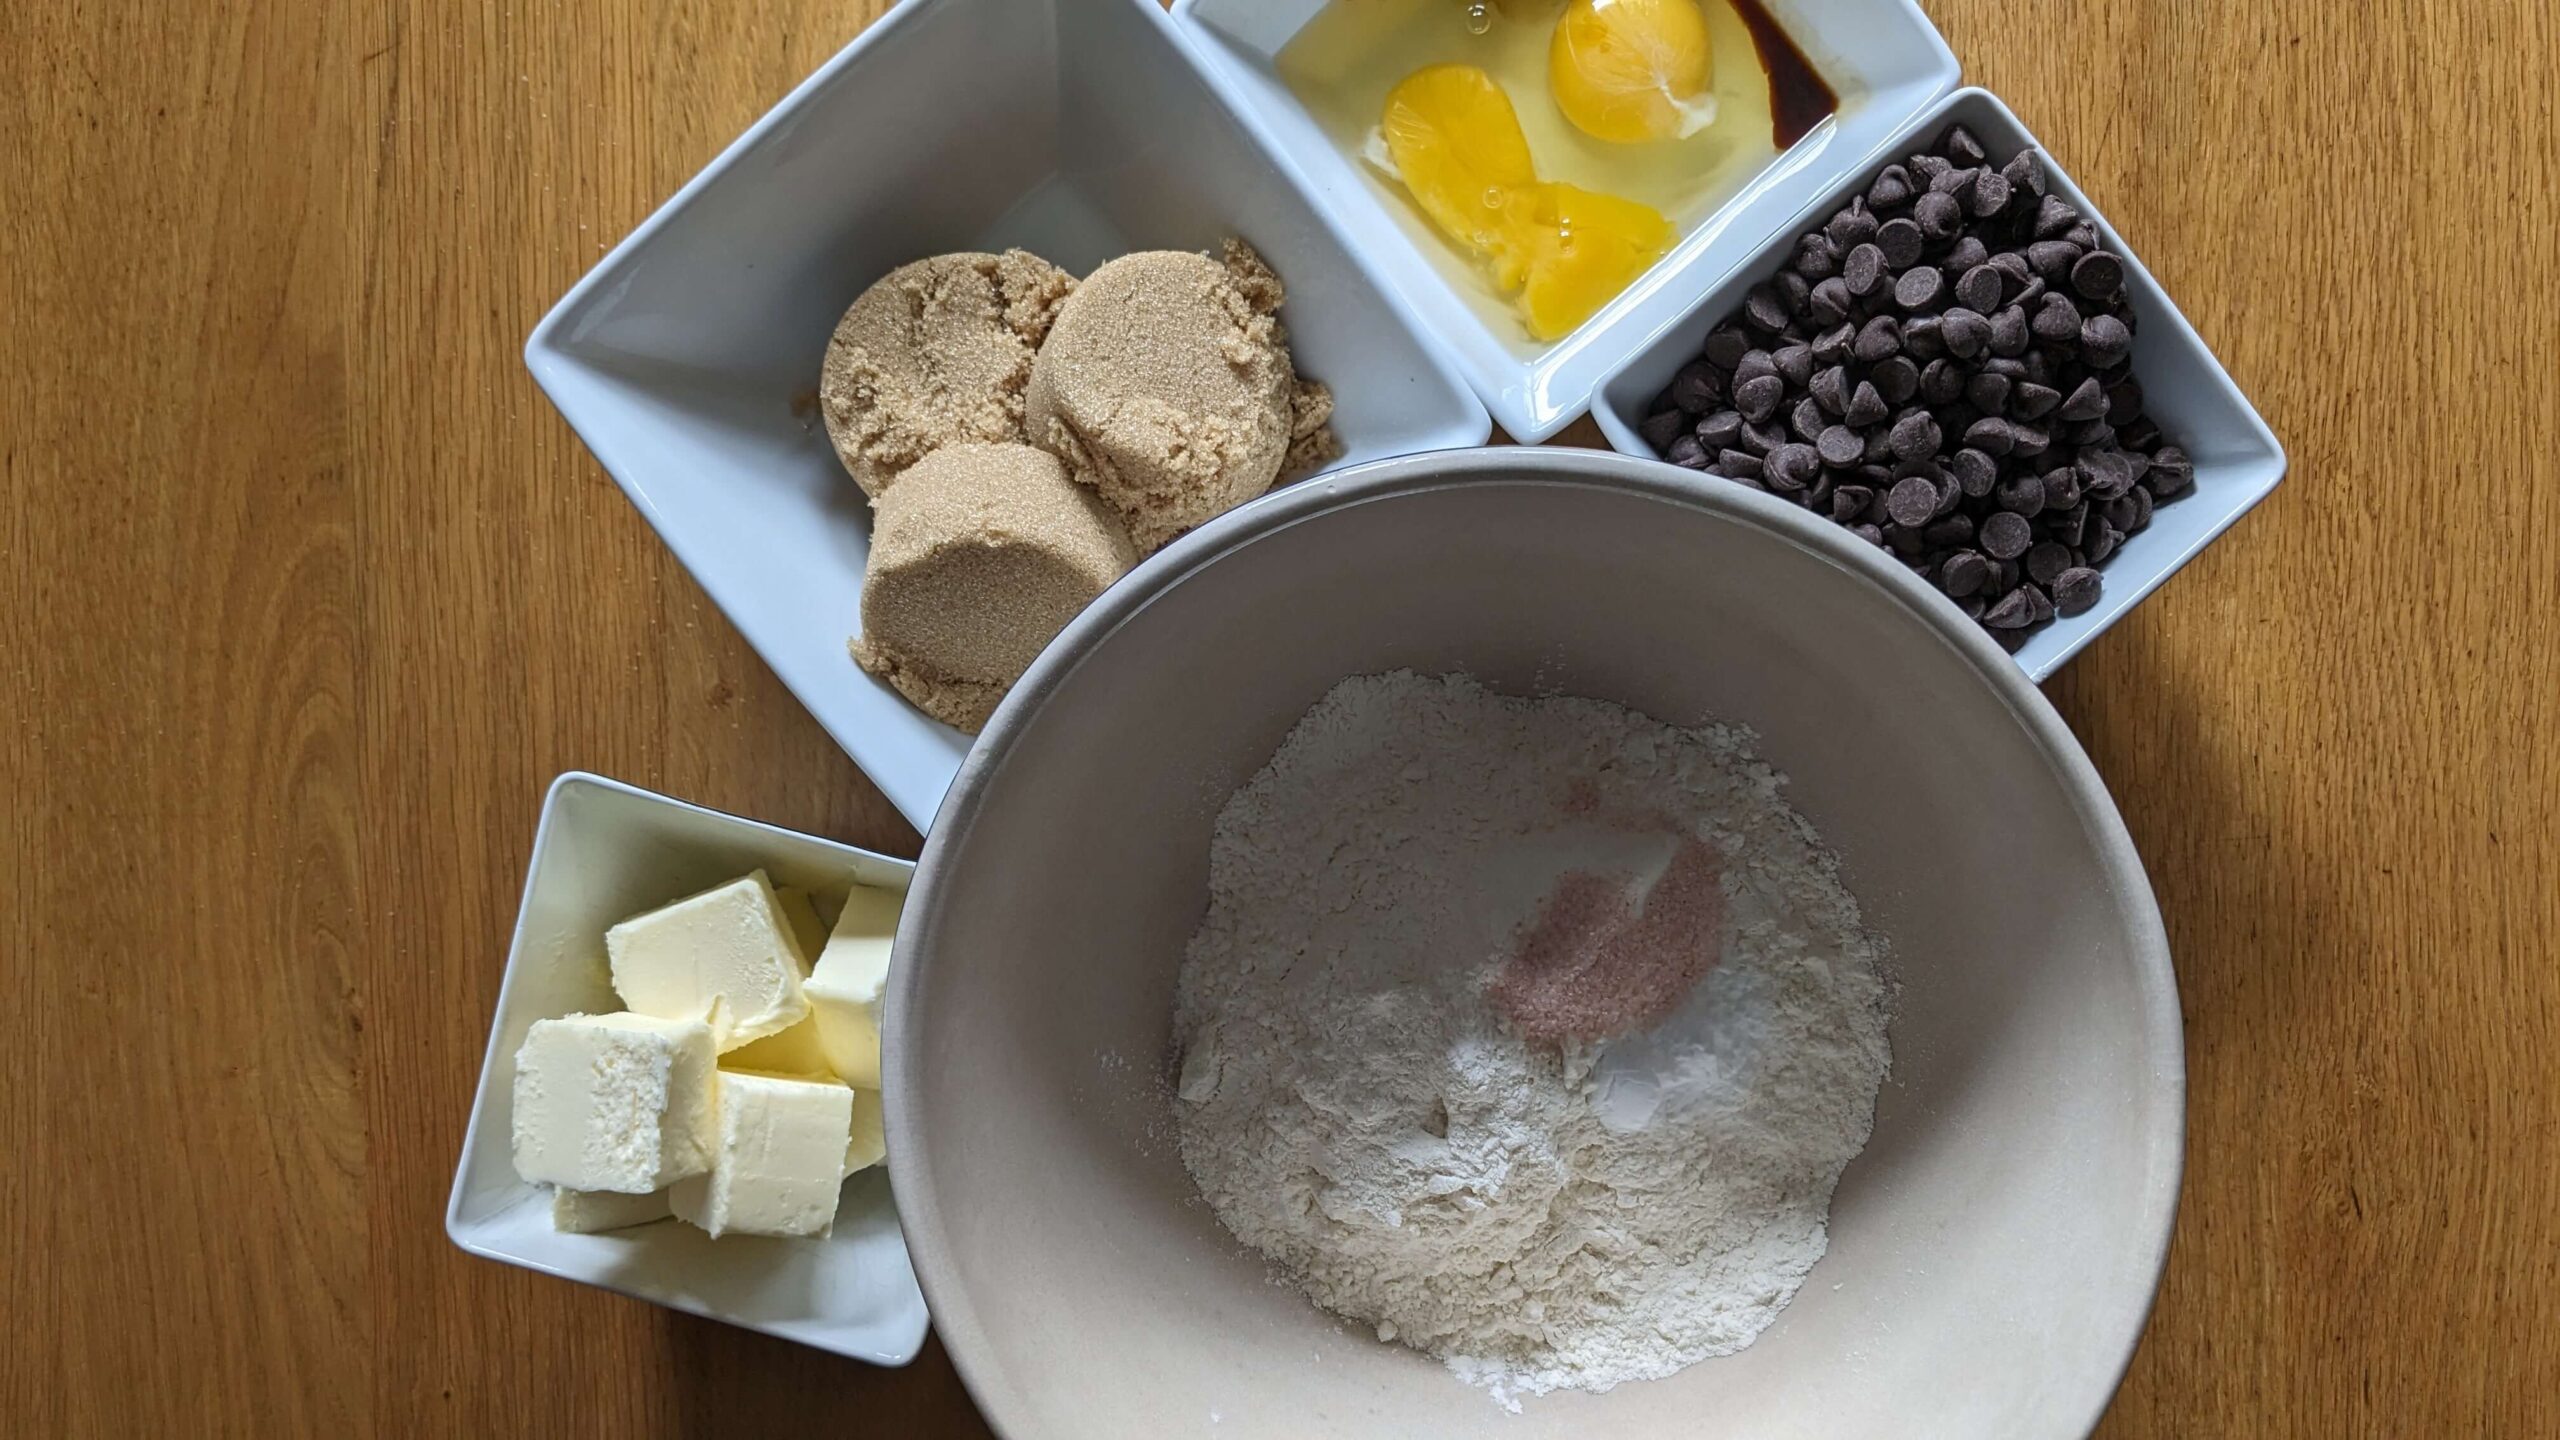 a bowl containing dry baking ingredients, a bowl holding slices of butter, a bowl holding scoops of brown sugar, a bowl holding two egg yokes and whites, and a bowl containing chocolate chips